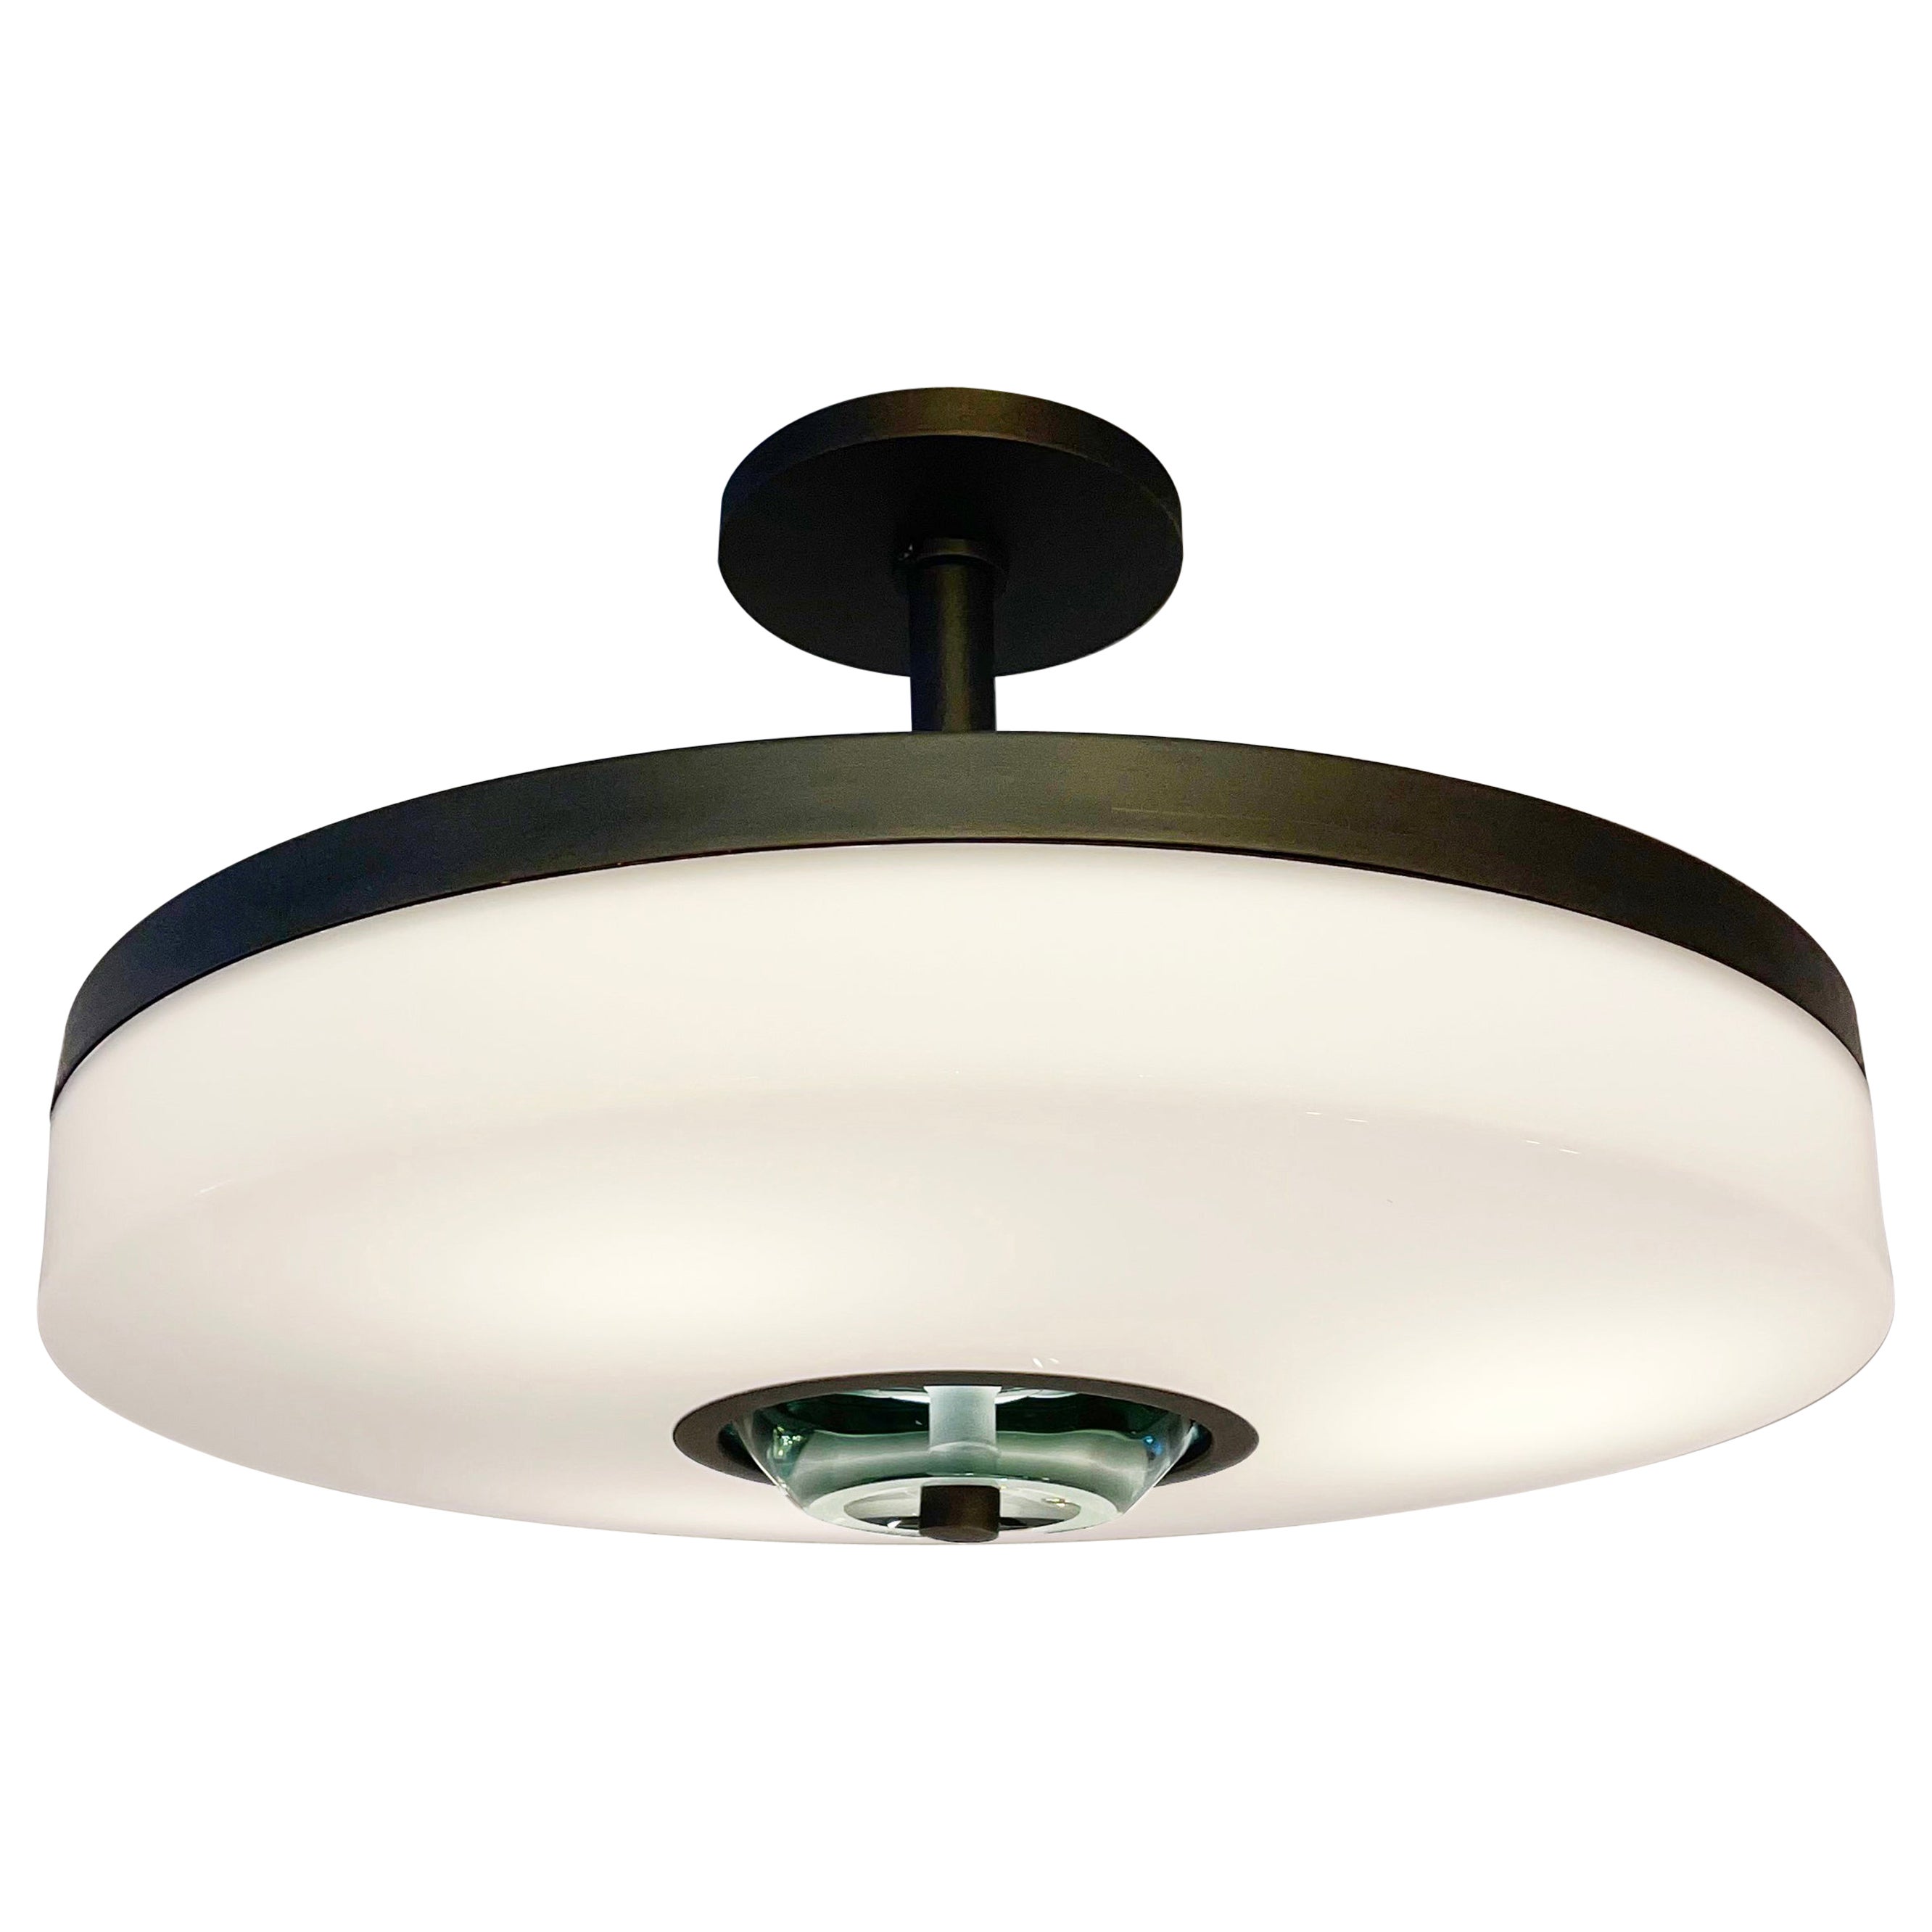 Iris Piccolo Ceiling Light by Gaspare Asaro, Green Glass Version